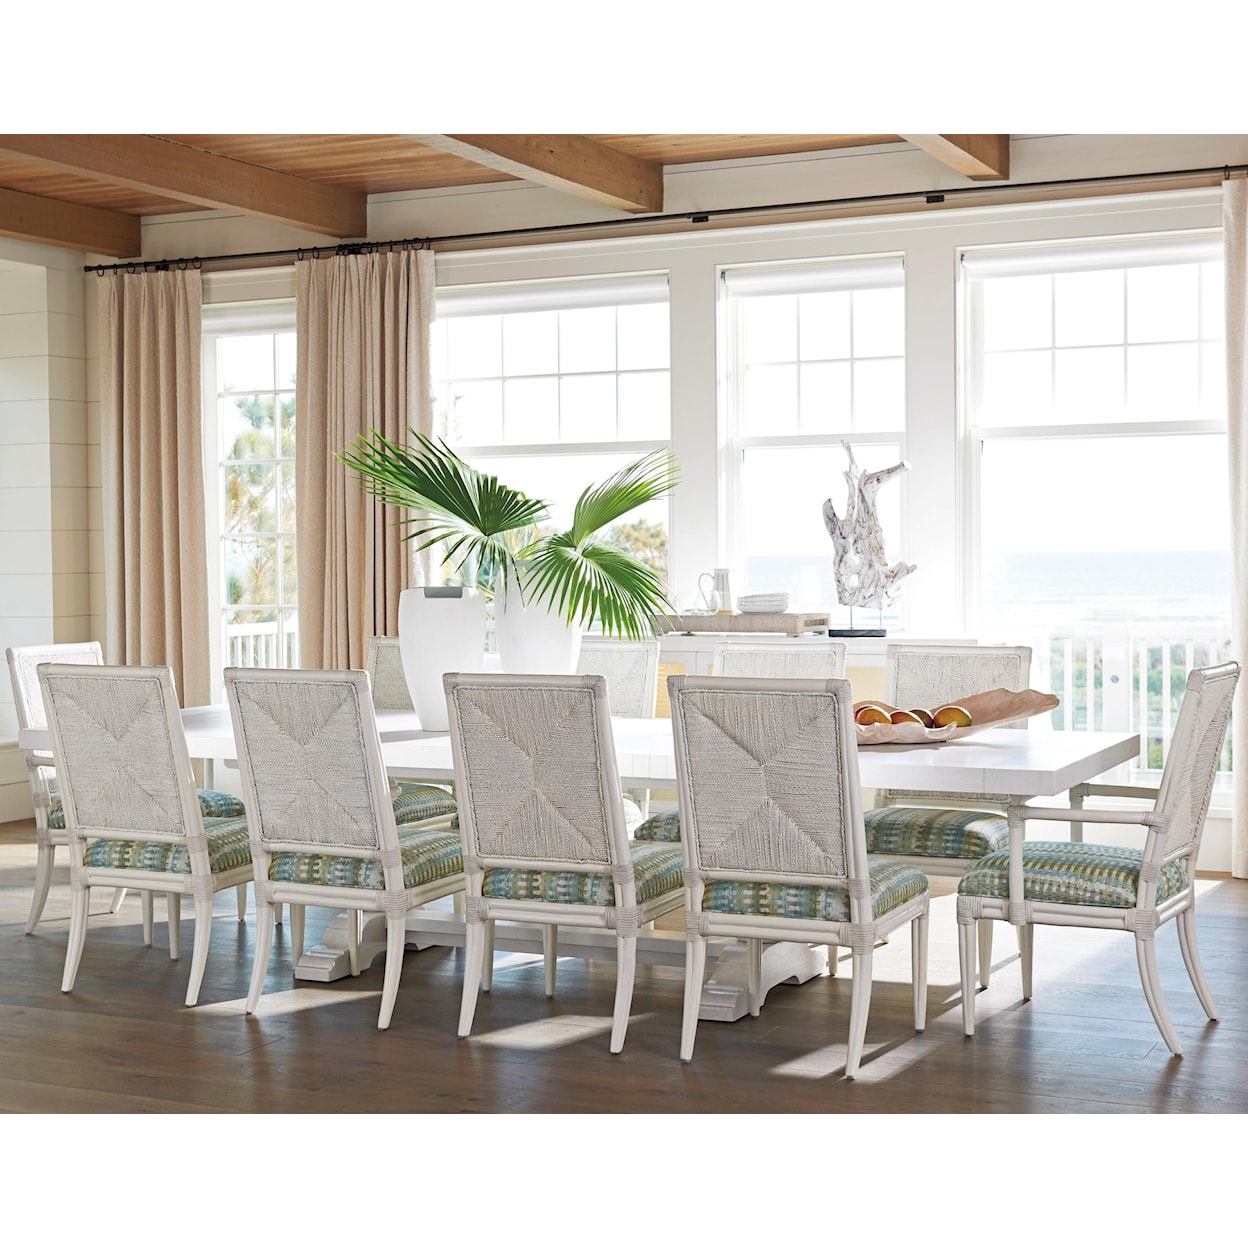 Tommy Bahama Home Ocean Breeze 11-Piece Dining Set